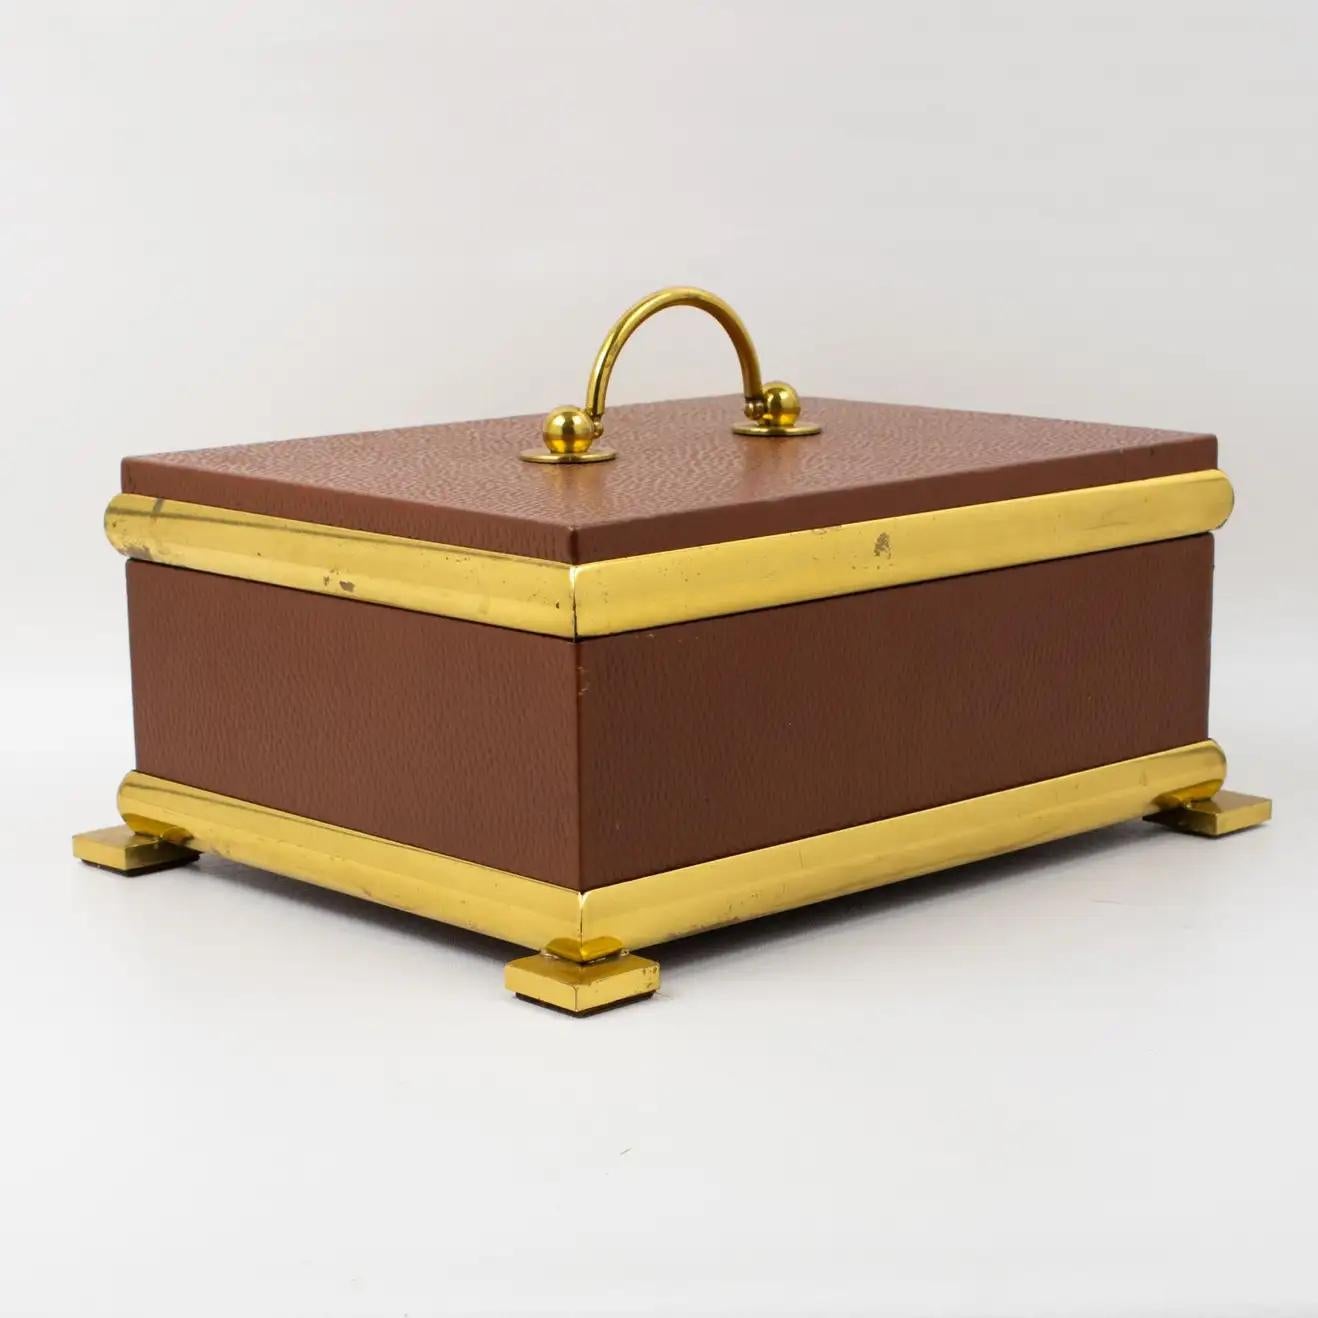 Italian Leather and Brass Decorative Box, 1950s Empire Style For Sale 1